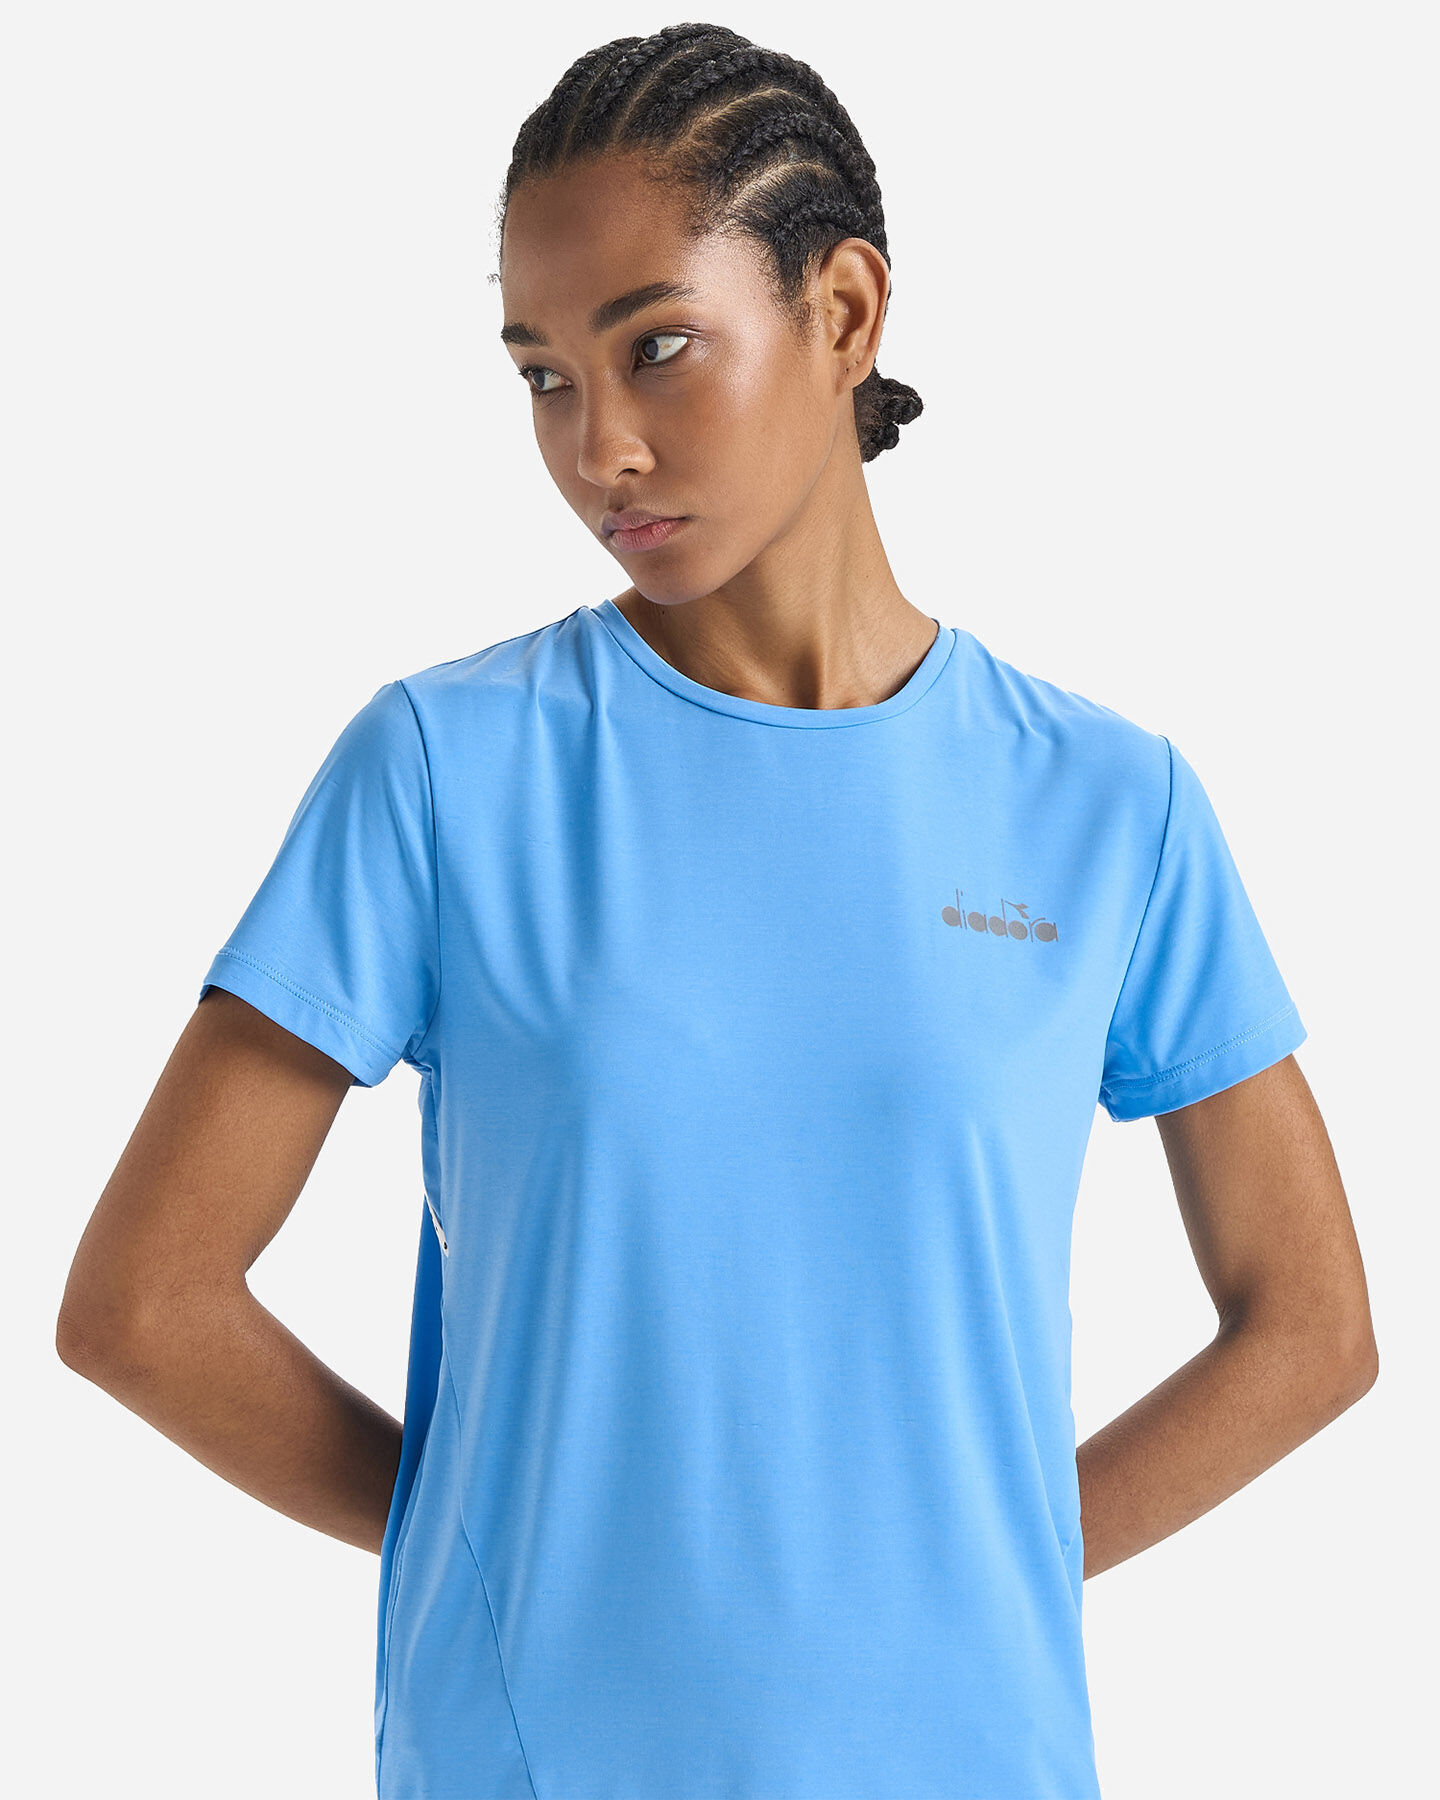  T-Shirt running DIADORA BE ONE W S5529693|65035|XS scatto 3